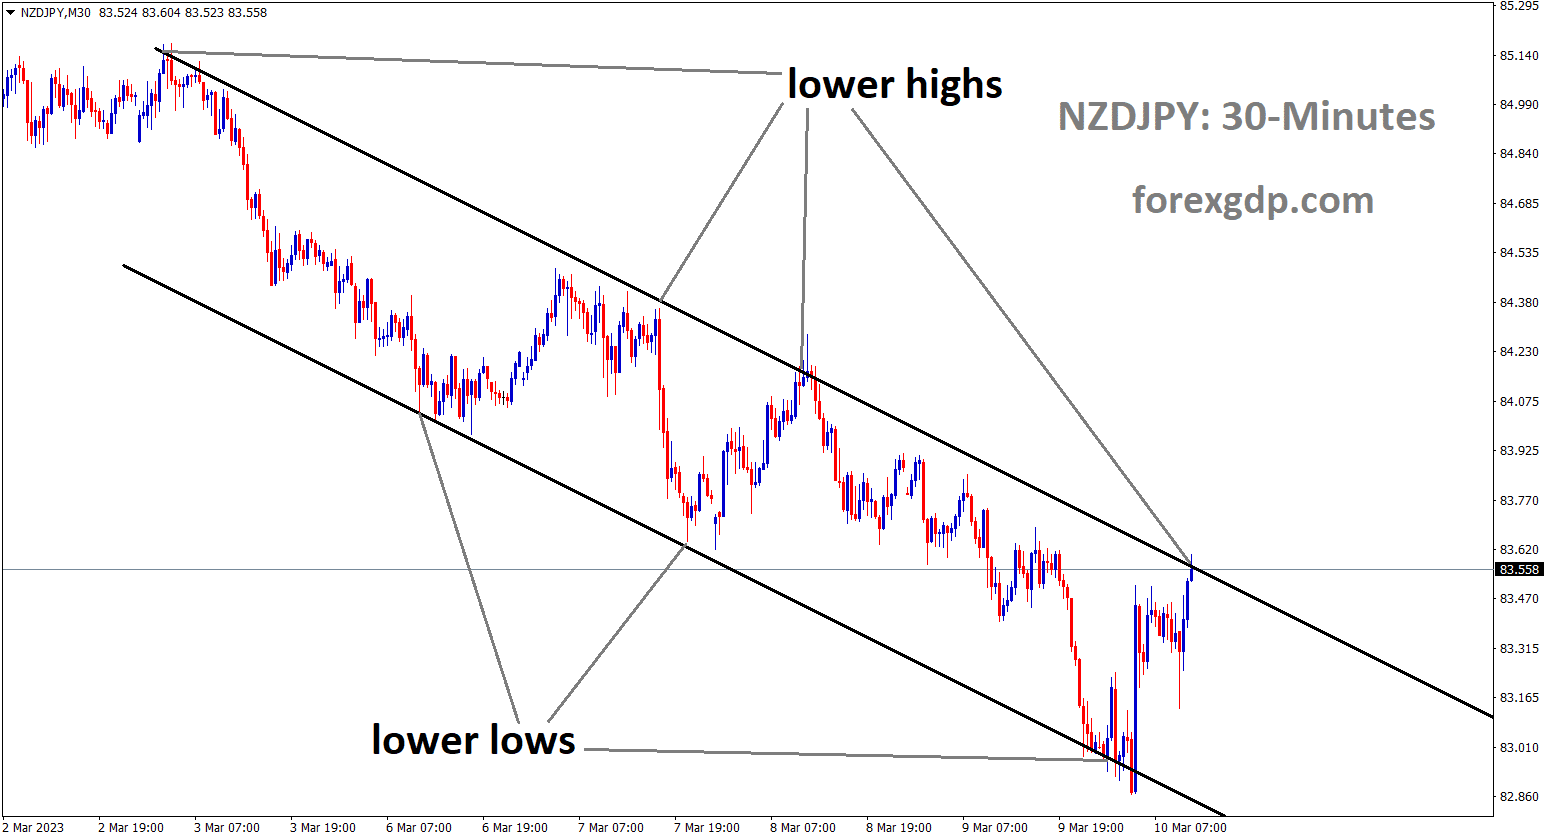 NZDJPY is moving in Descending channel and the market has reached the lower high area of the channel.